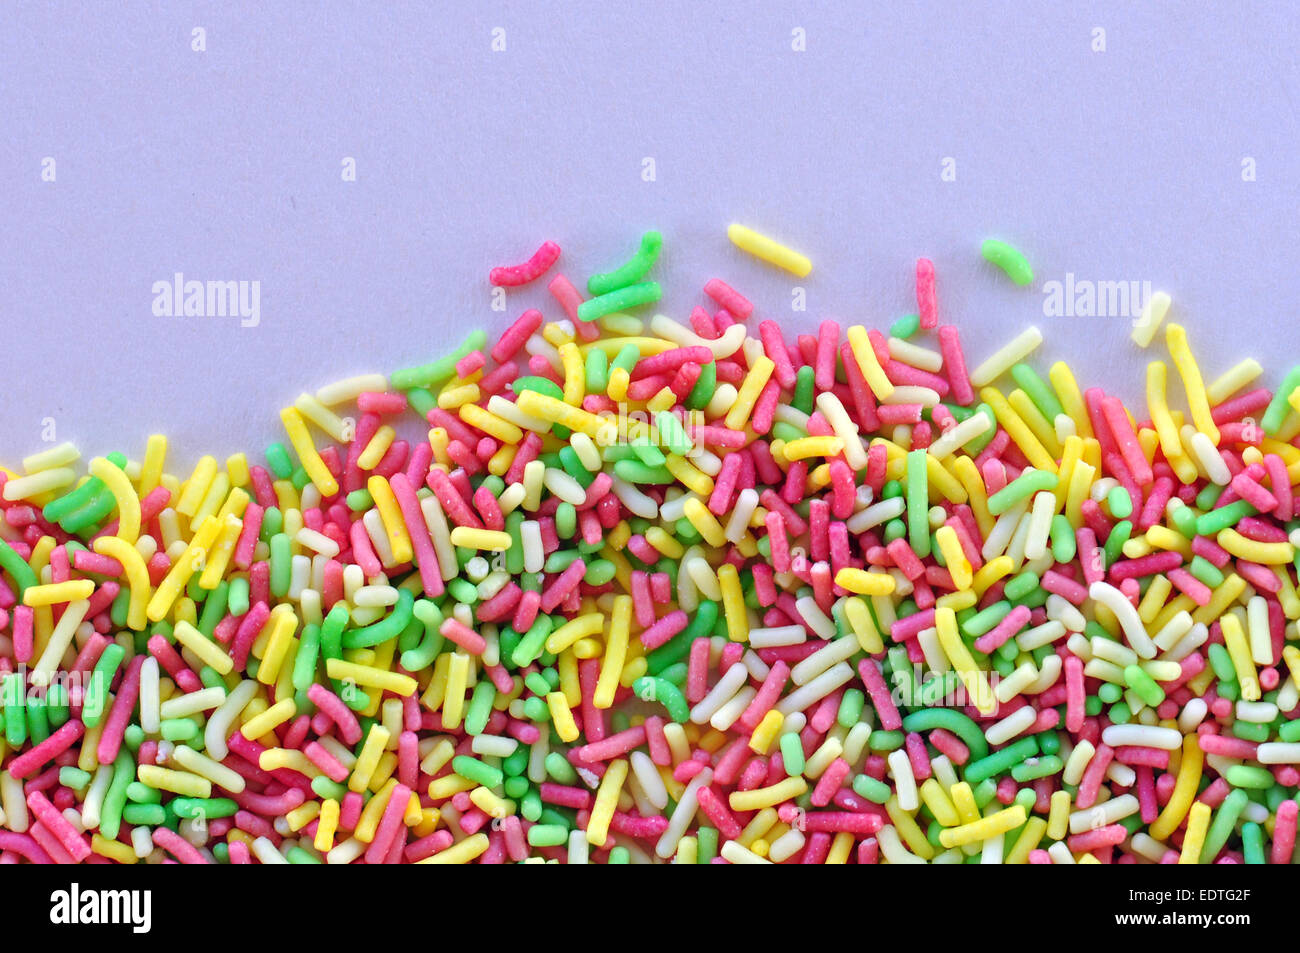 Colorful candy sprinkles garnish sweet food topping on white background. Stock Photo